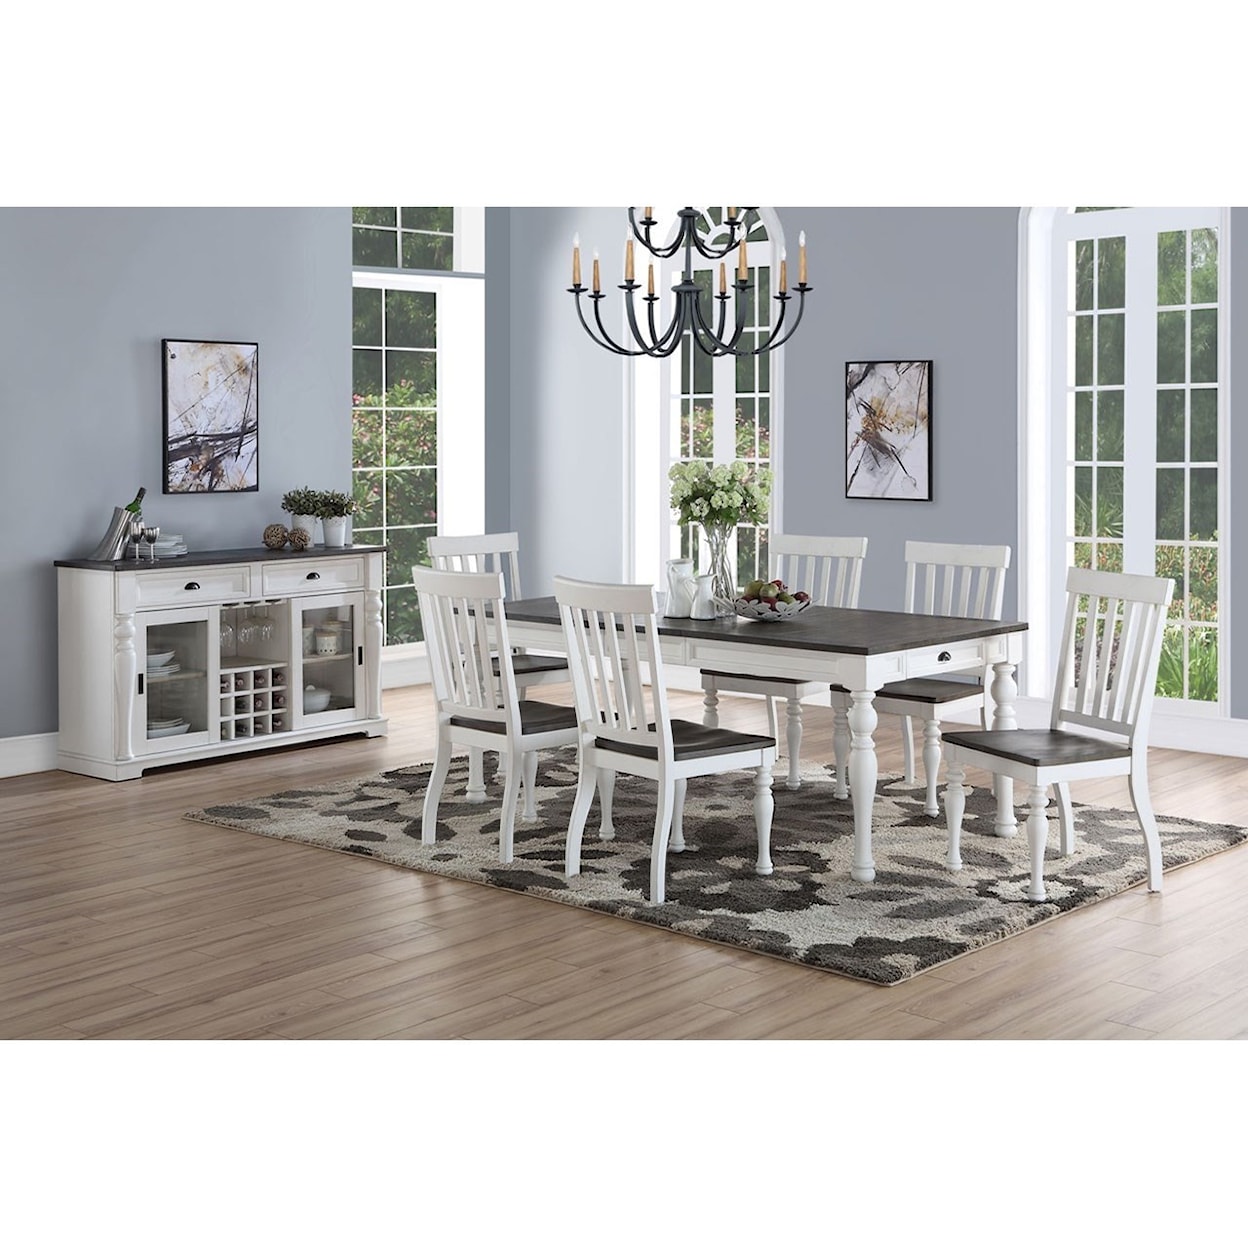 Prime Joanna Table and Chair Set